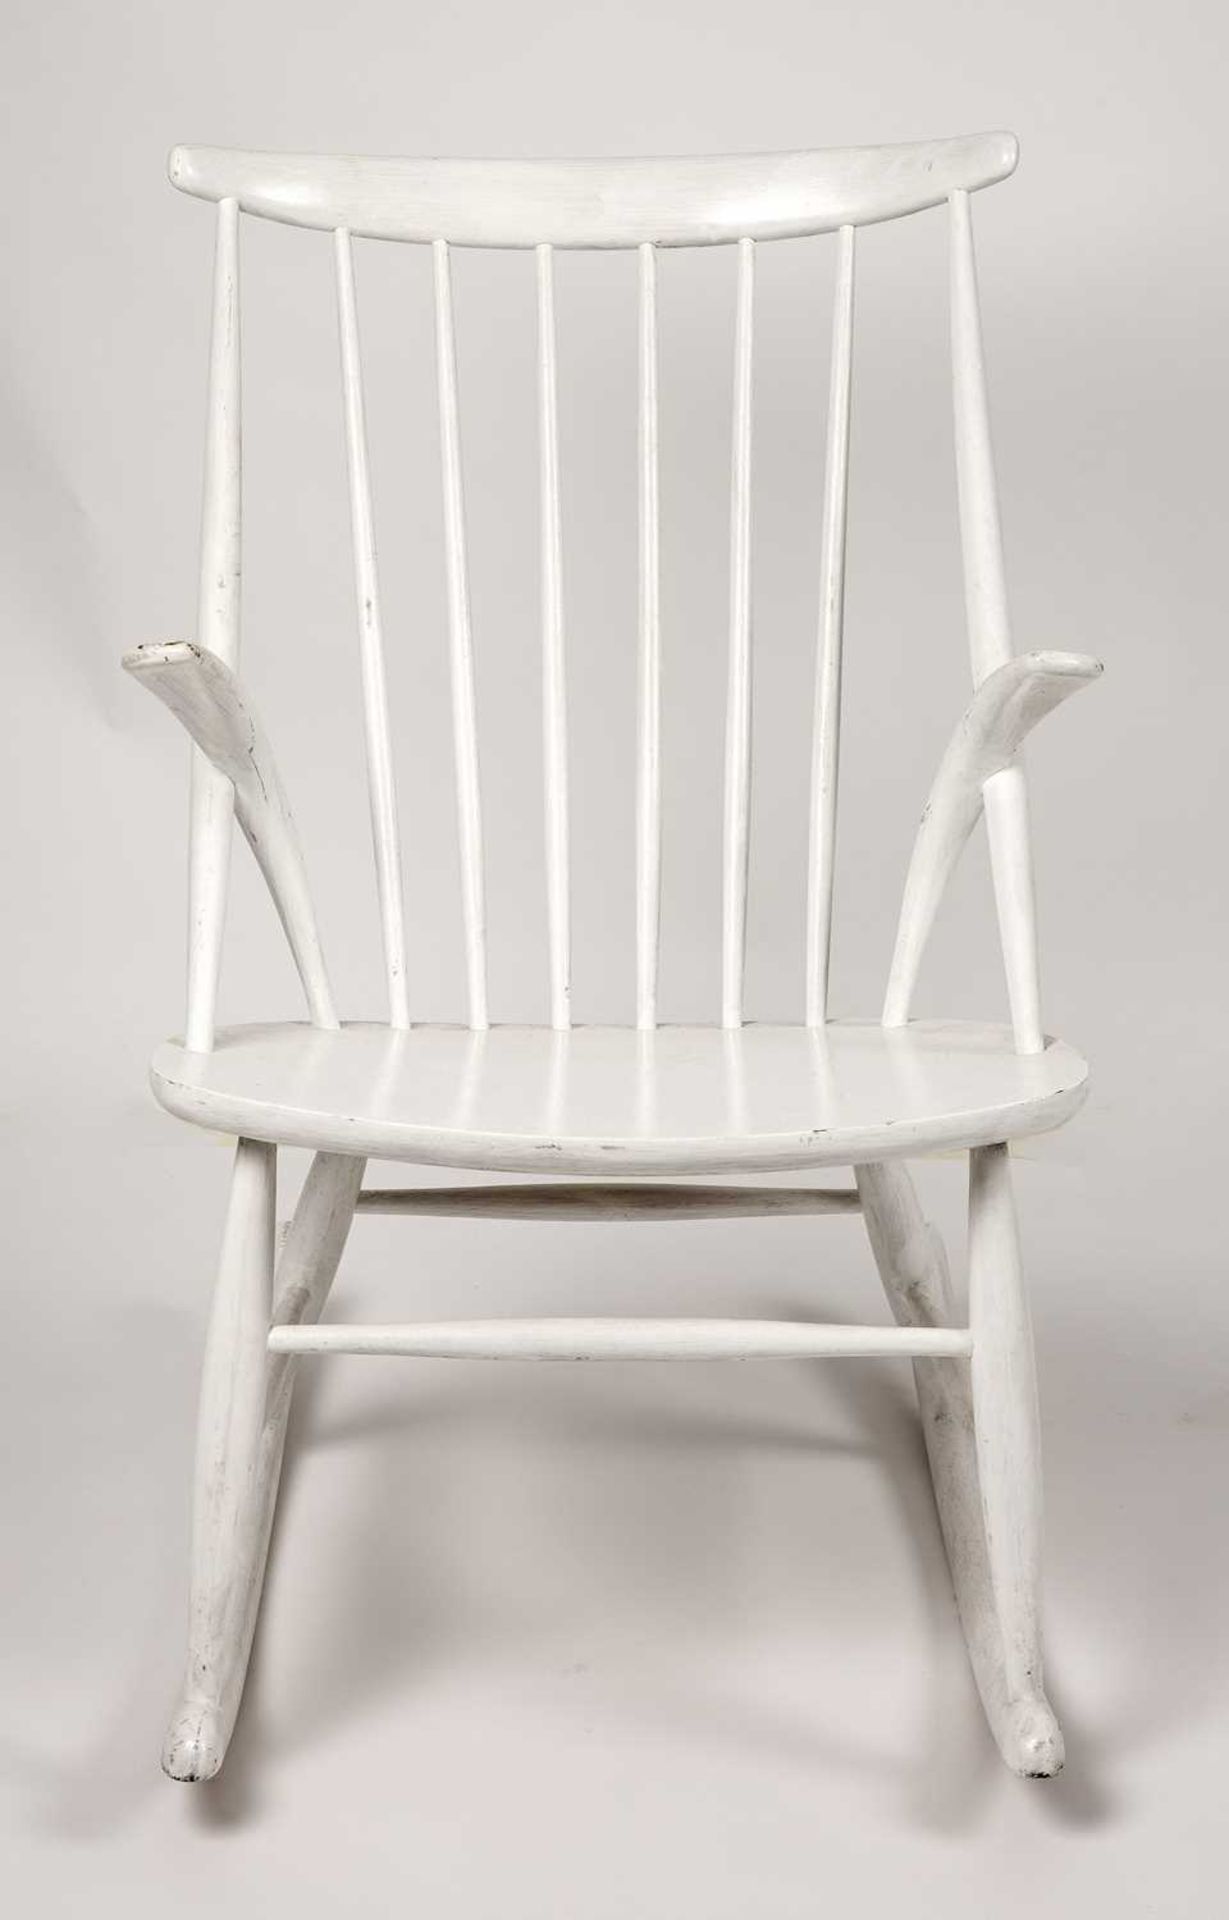 Illum Wikkelso for Neil Eilersen Rocking chair, designed in 1958 white painted wood 95cm high, 55cm - Image 2 of 4